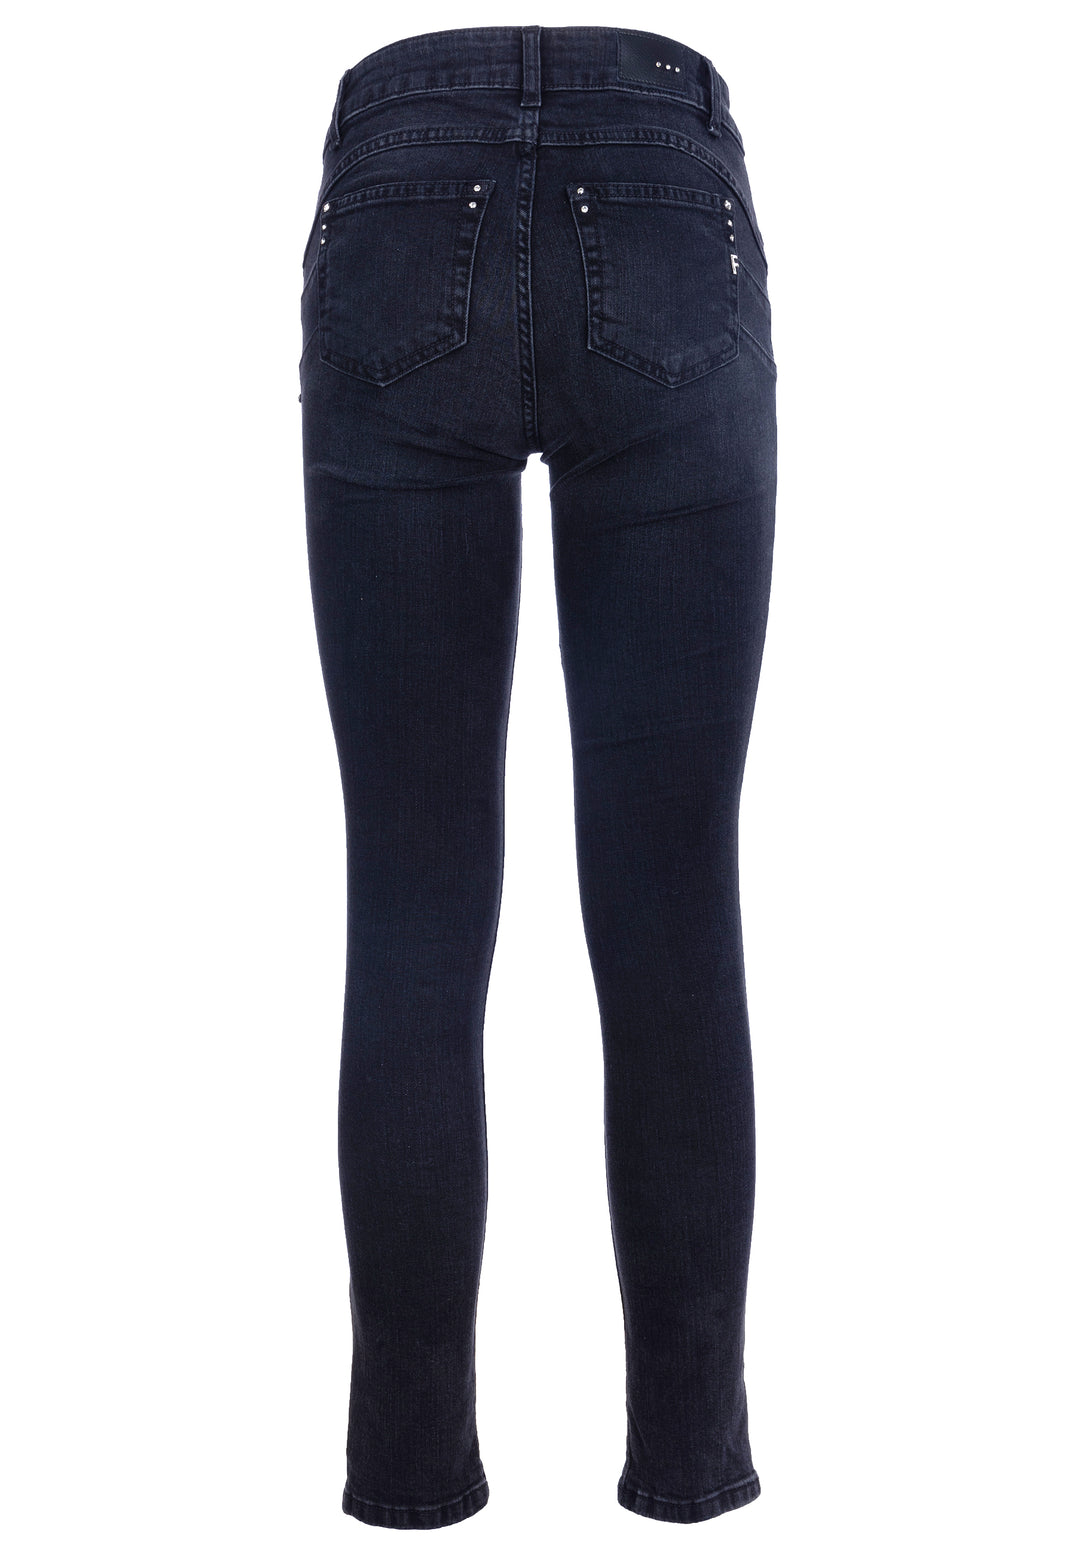 Jeans skinny fit with push-up effect made in color denim with dark wash